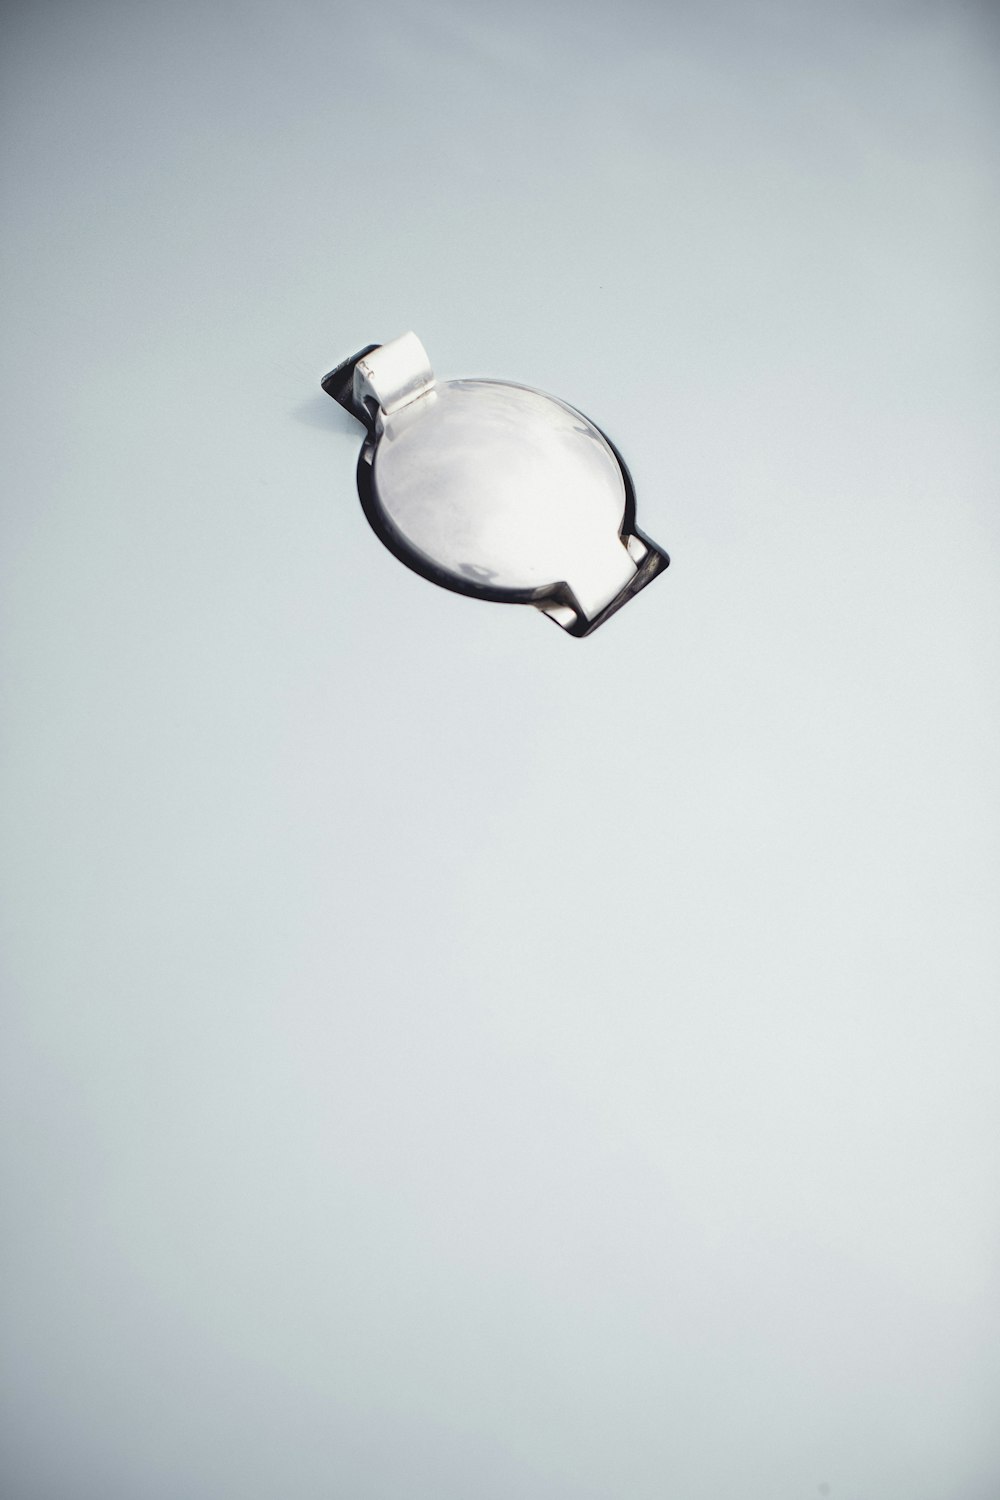 a white object floating in the air on a gray background